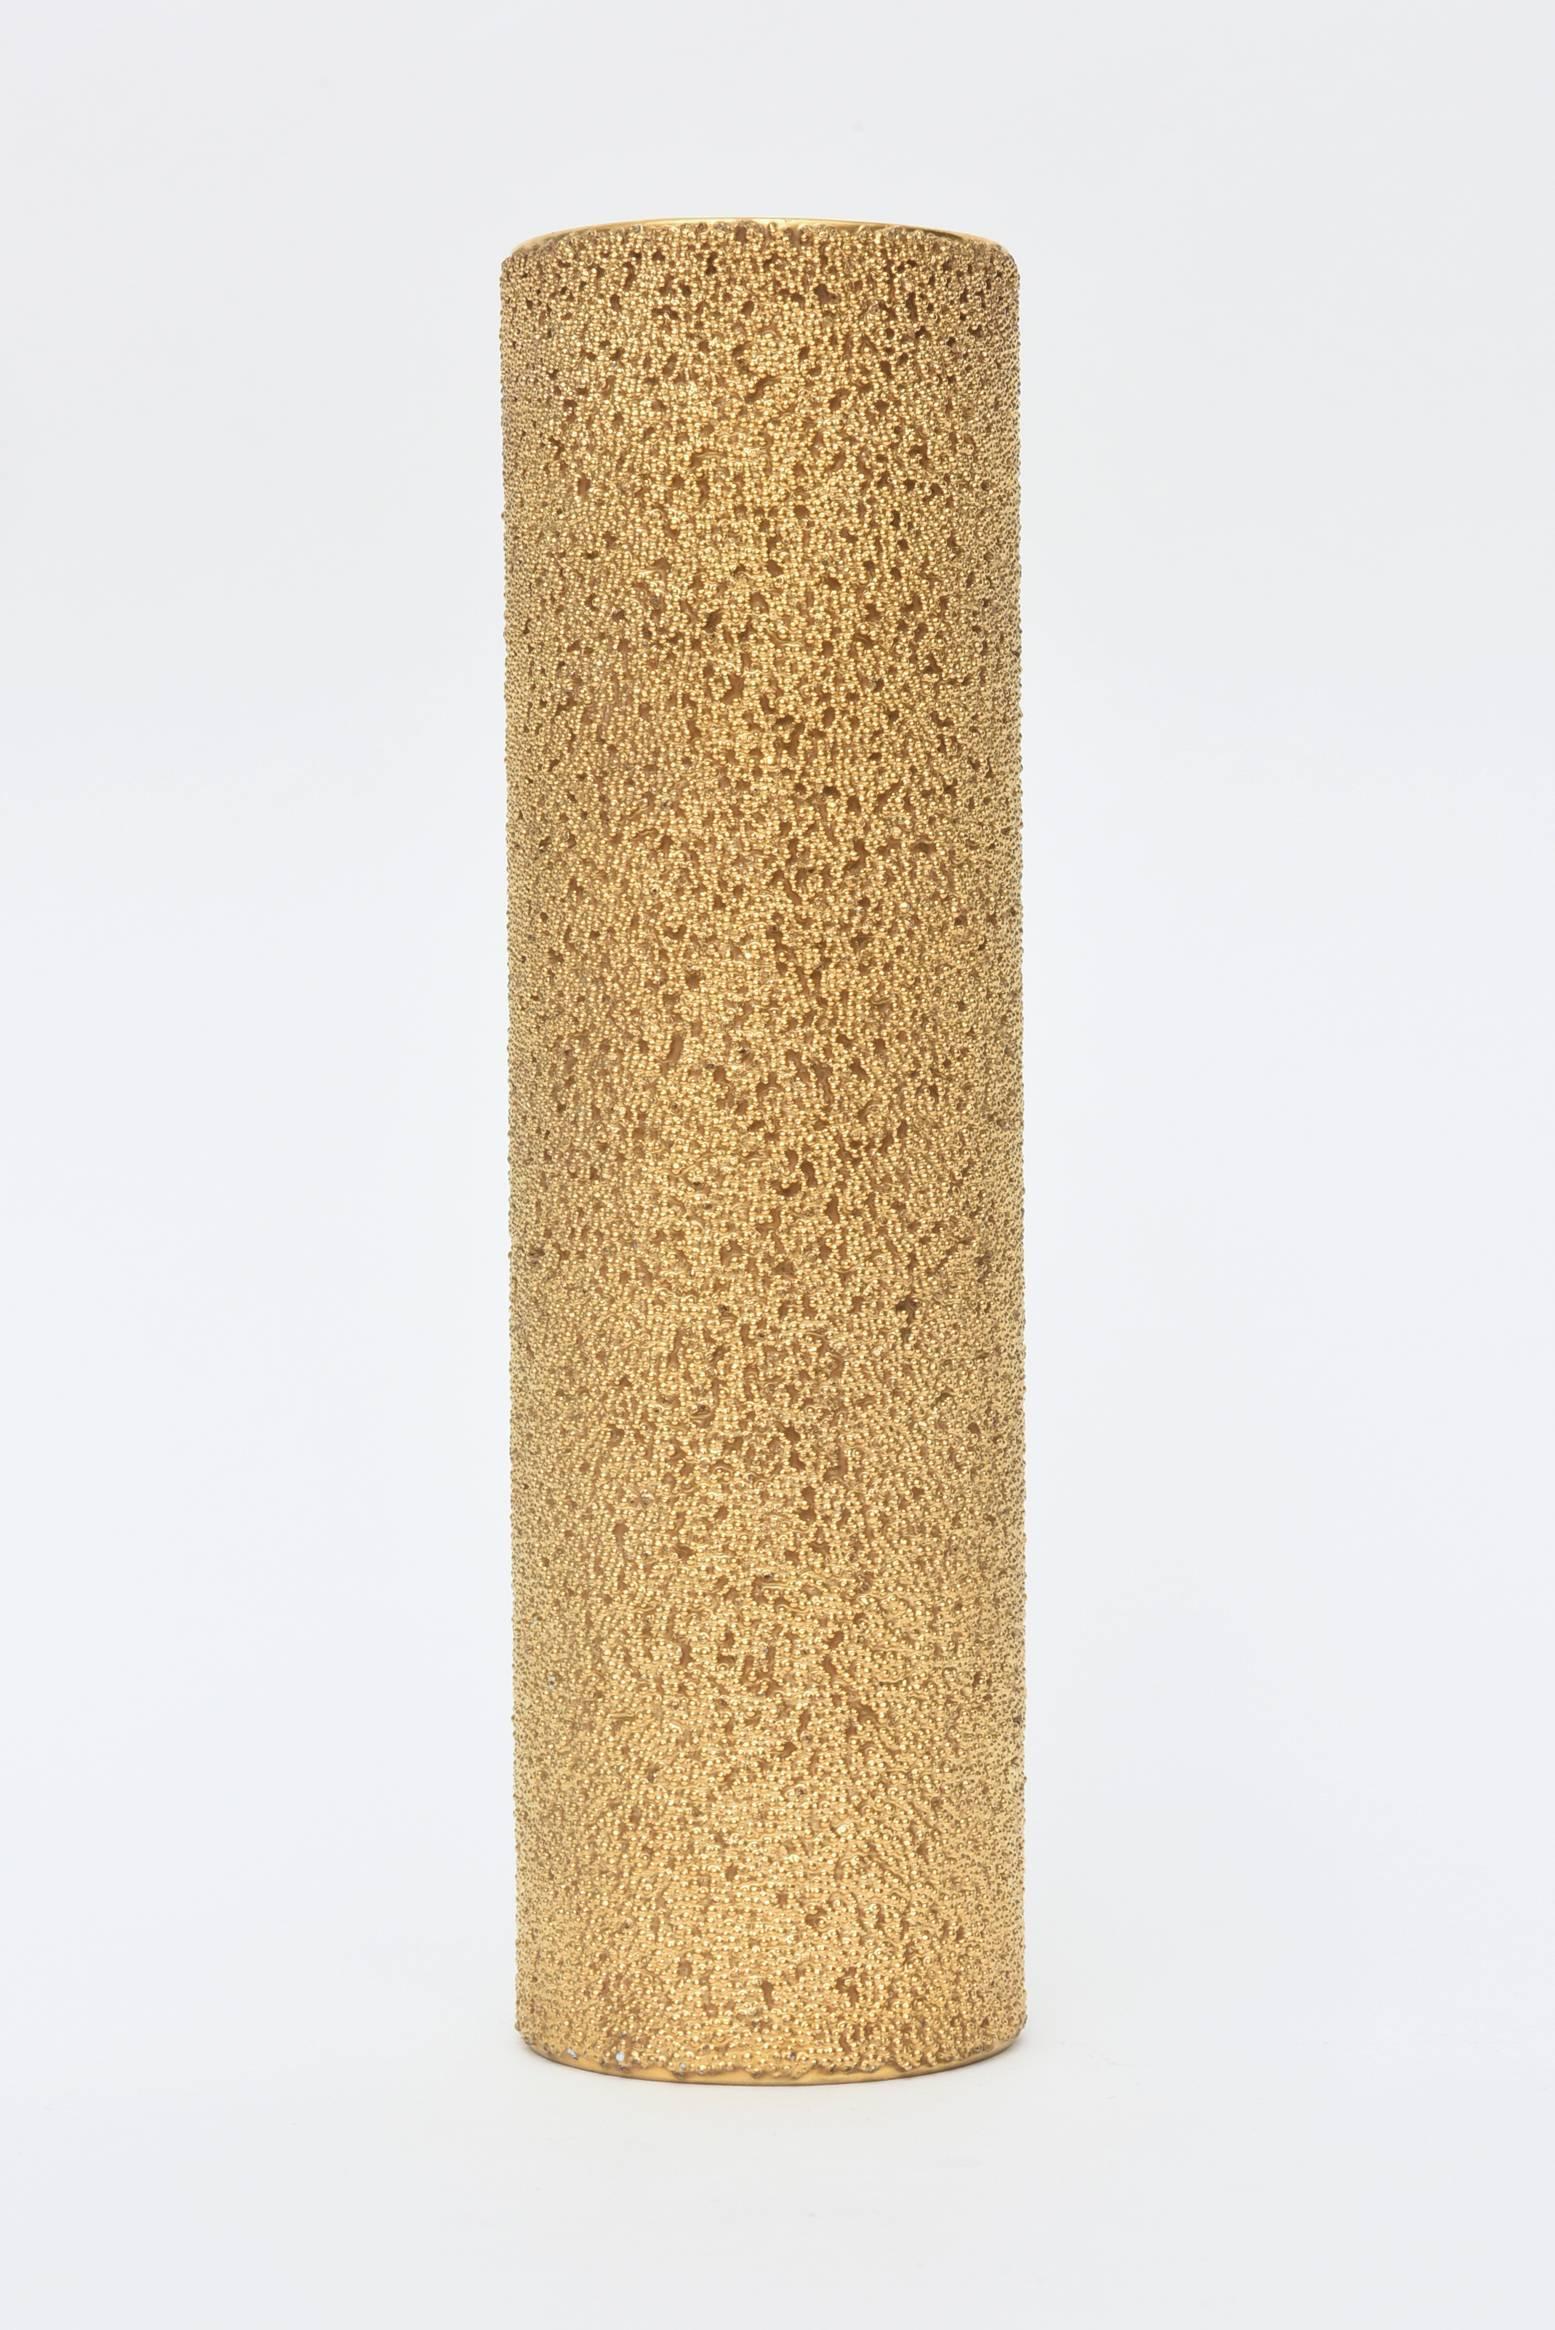 This beautiful rich looking column Rosenthal vase are beads of 23-carat gold over white porcelain. It is hallmarked on the bottom by Rosenthal Studio Line Germany. It is called the Goldenes Vies.
The layering and texture are gold beads in abundance